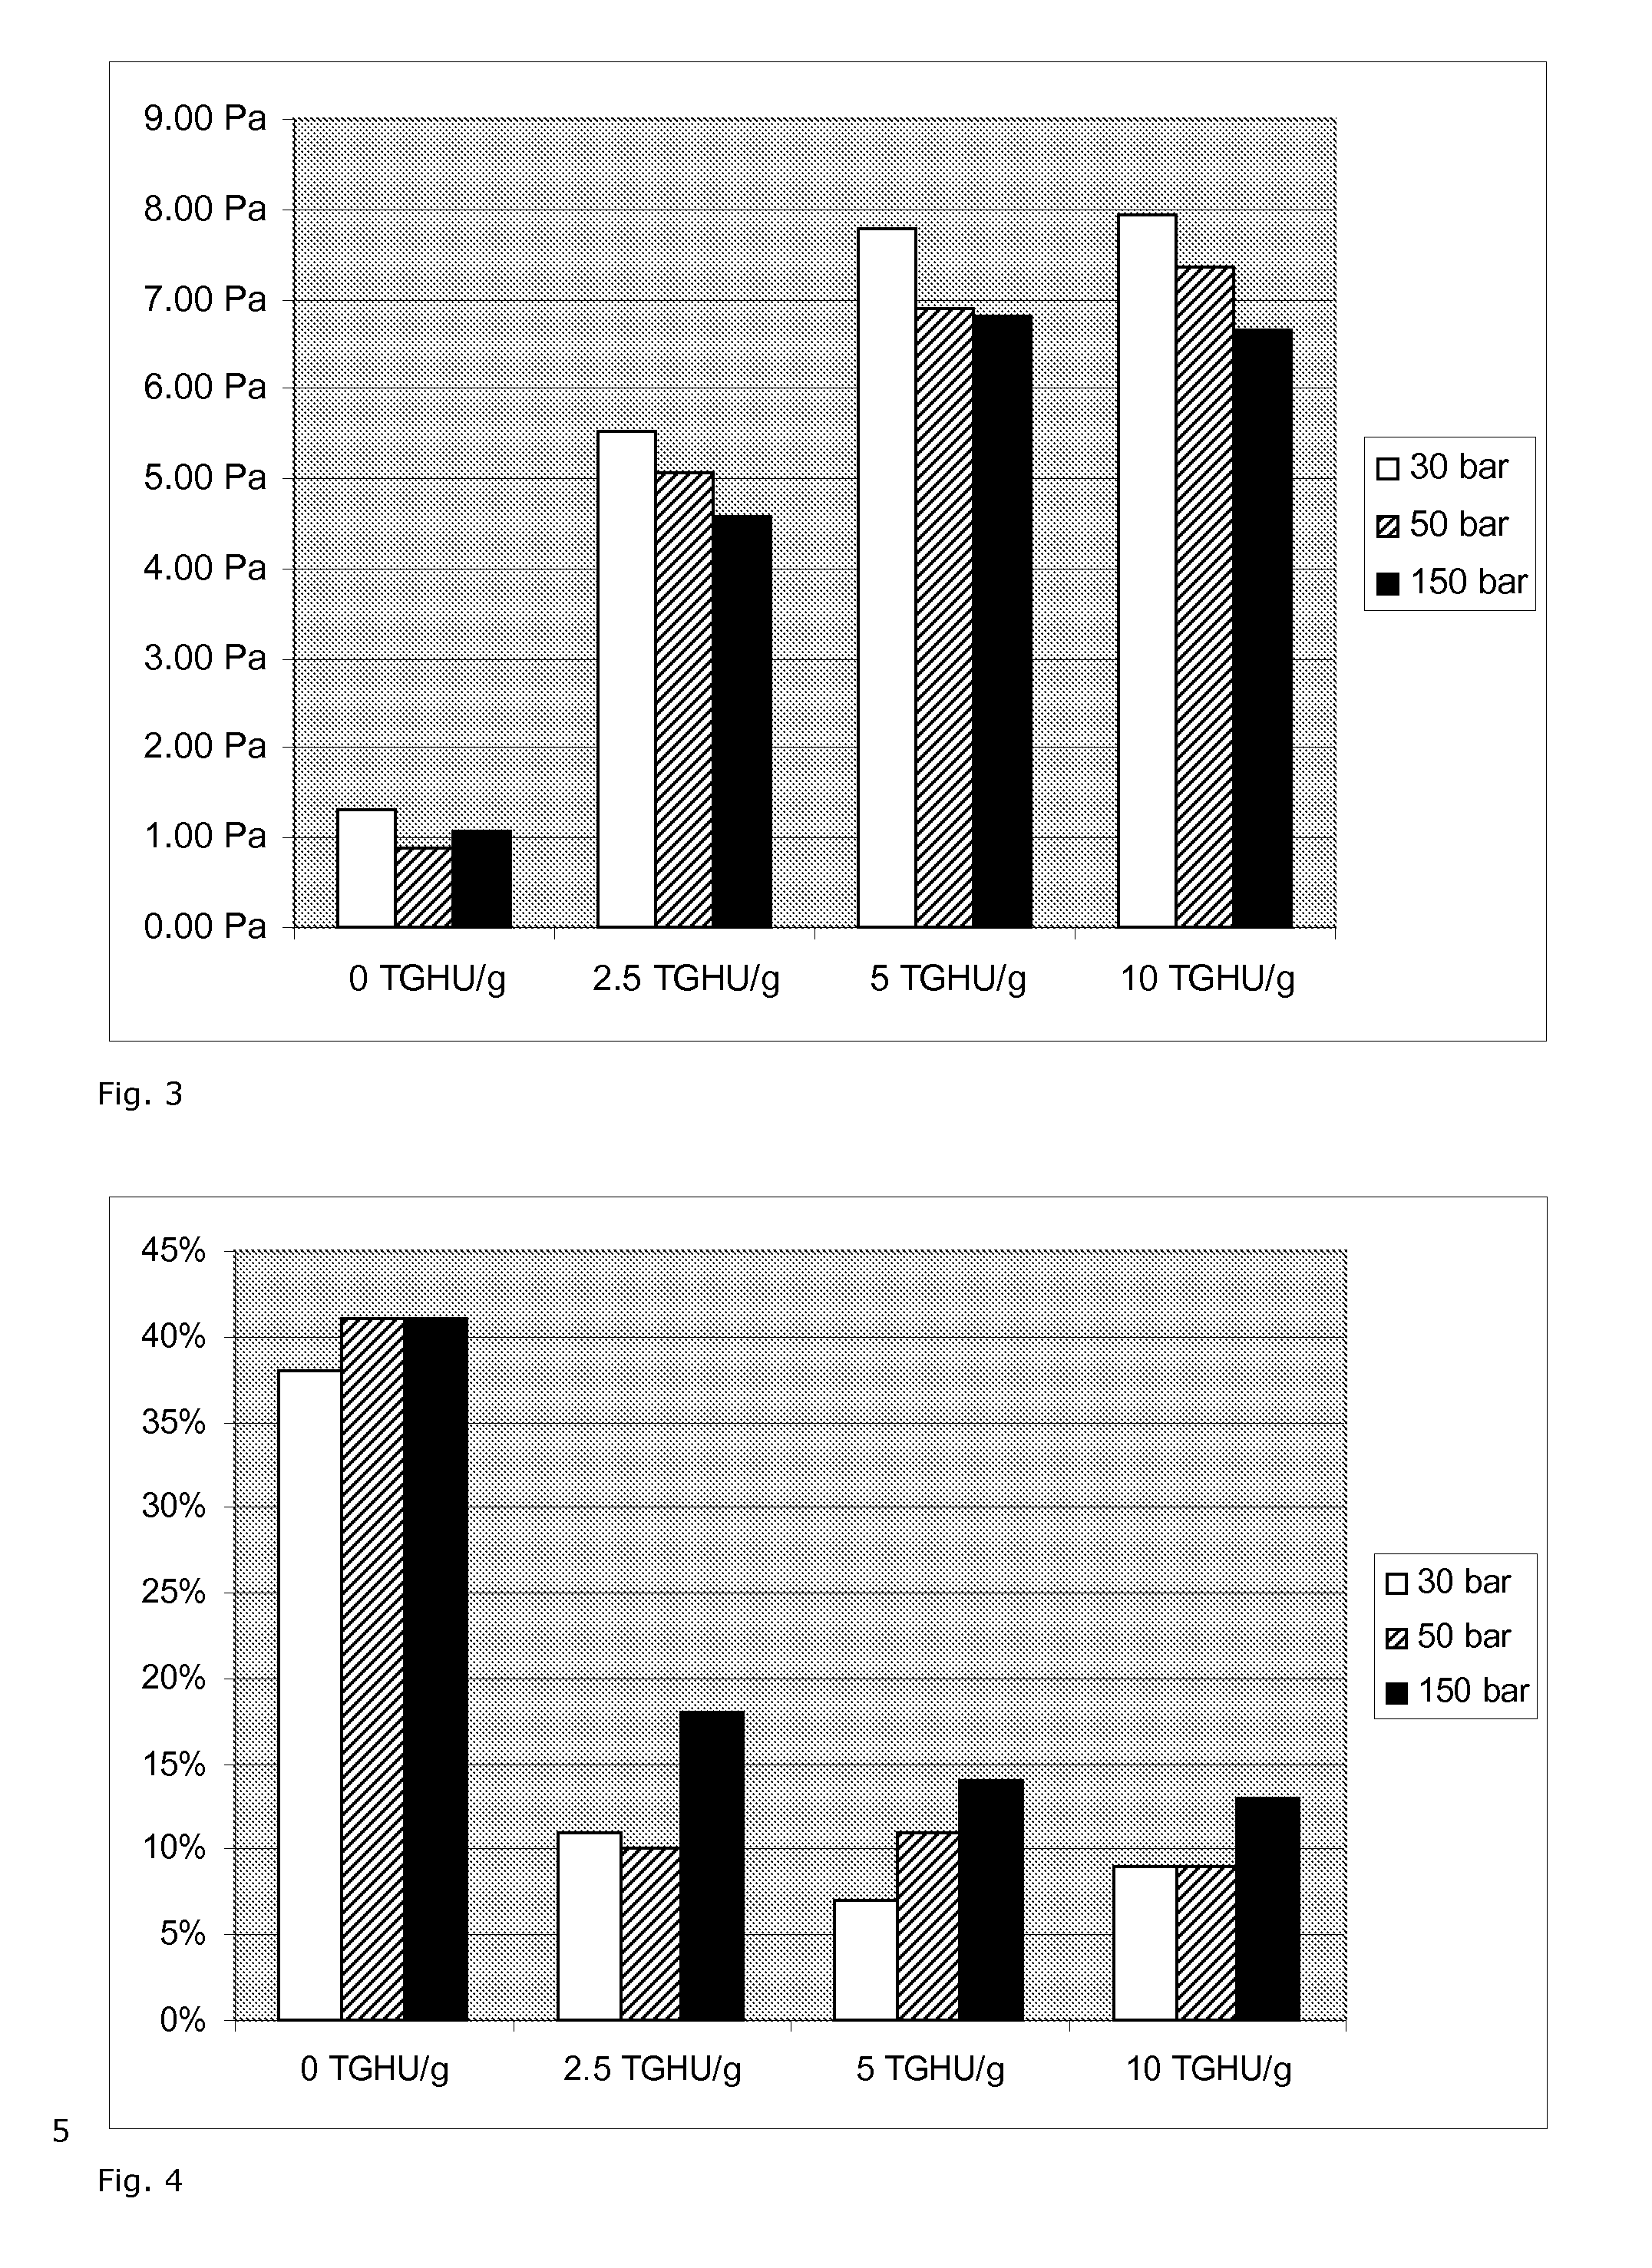 Method for producing an acidified milk product